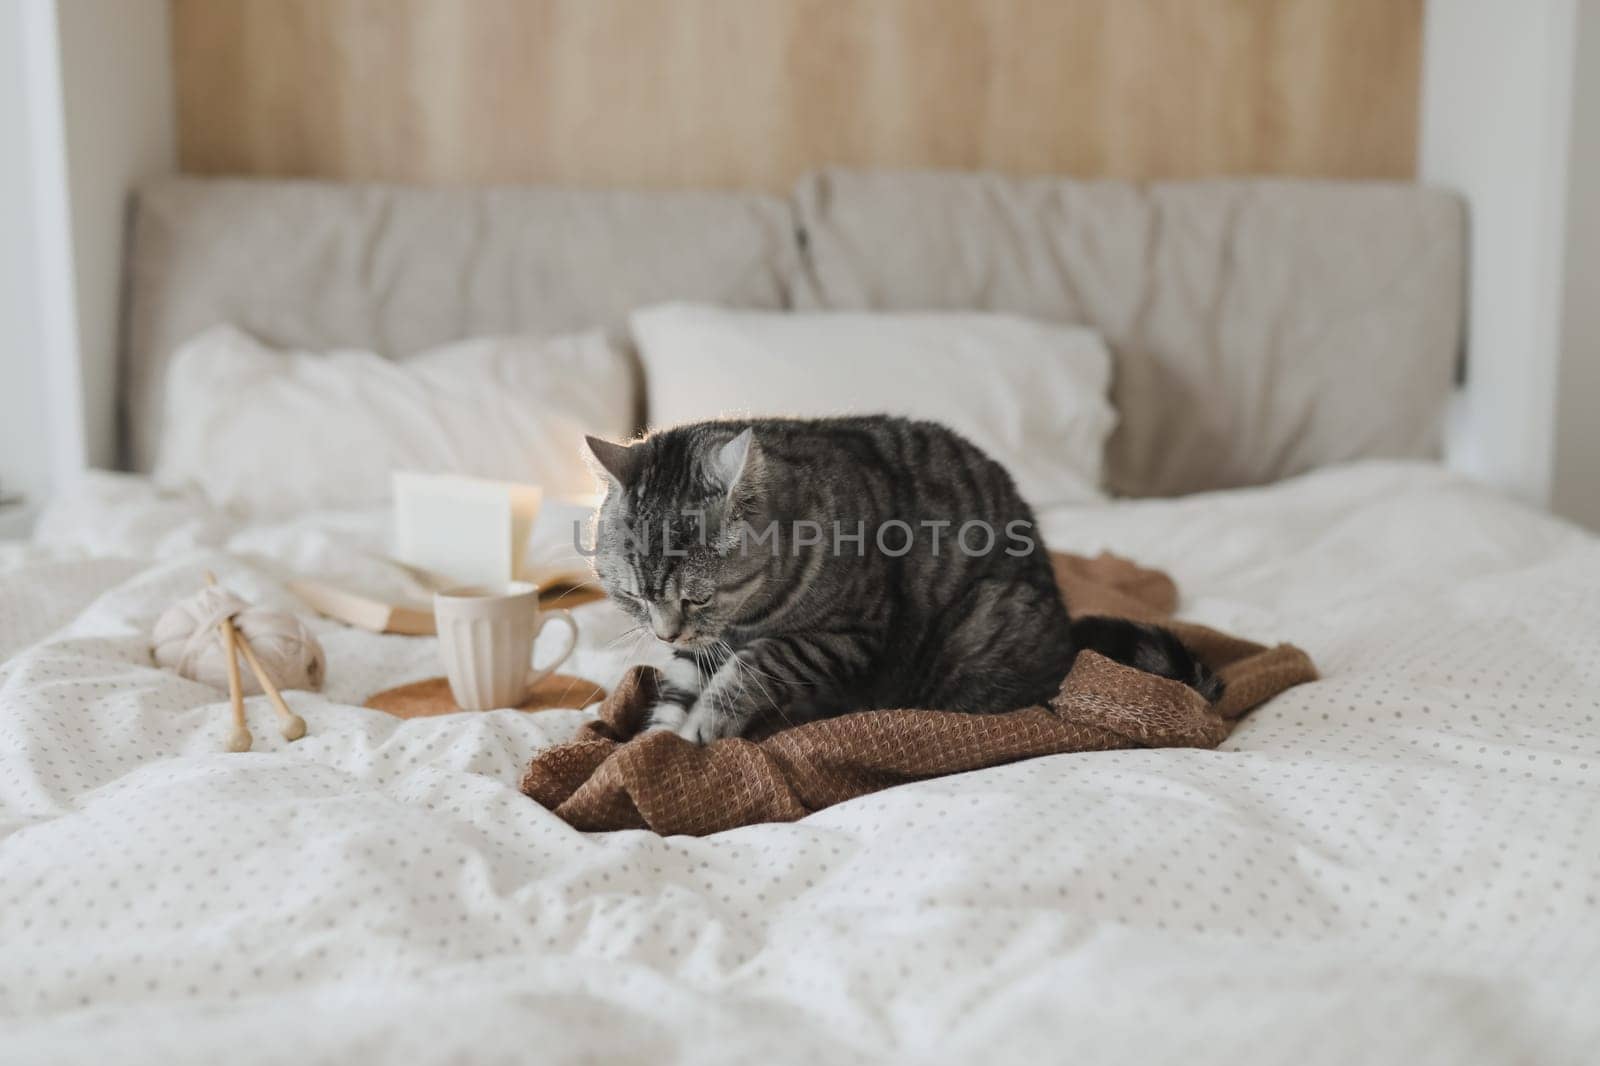 Cute tabby cat in bed on warm blanket. Hygge concept. Lazy weekend. Cozy home atmosphere by paralisart